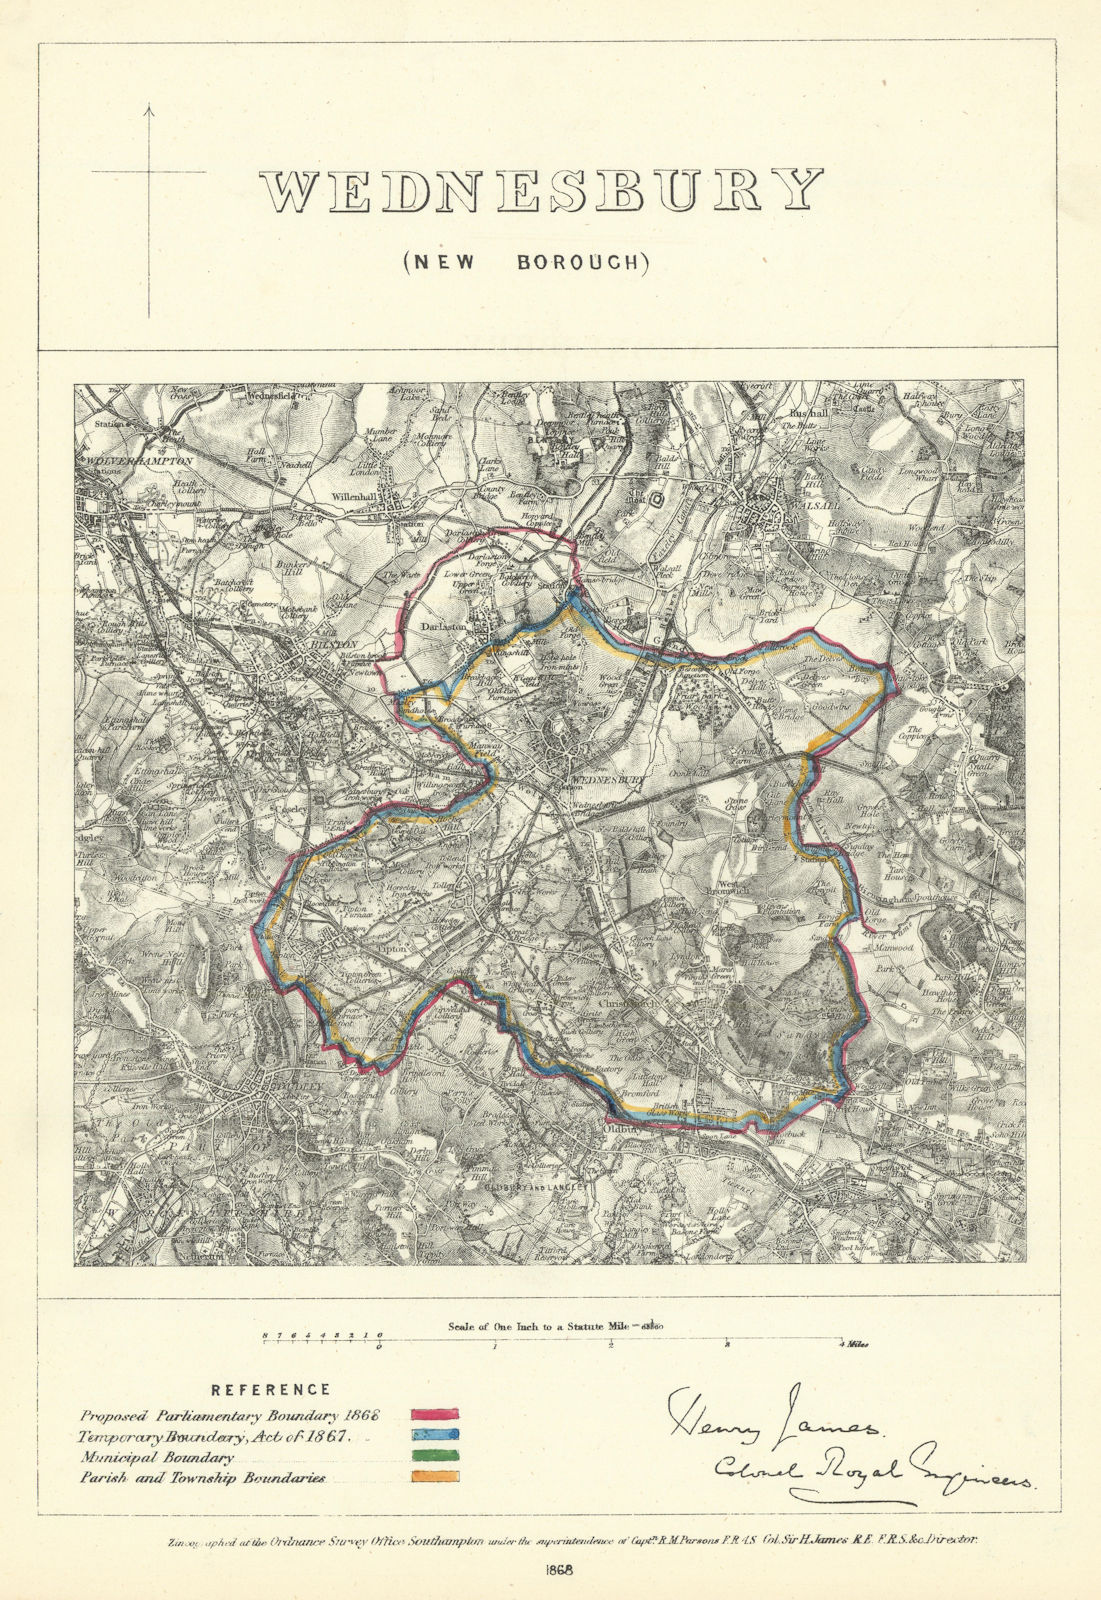 Associate Product Wednesbury, Staffordshire. JAMES. Parliamentary Boundary Commission 1868 map